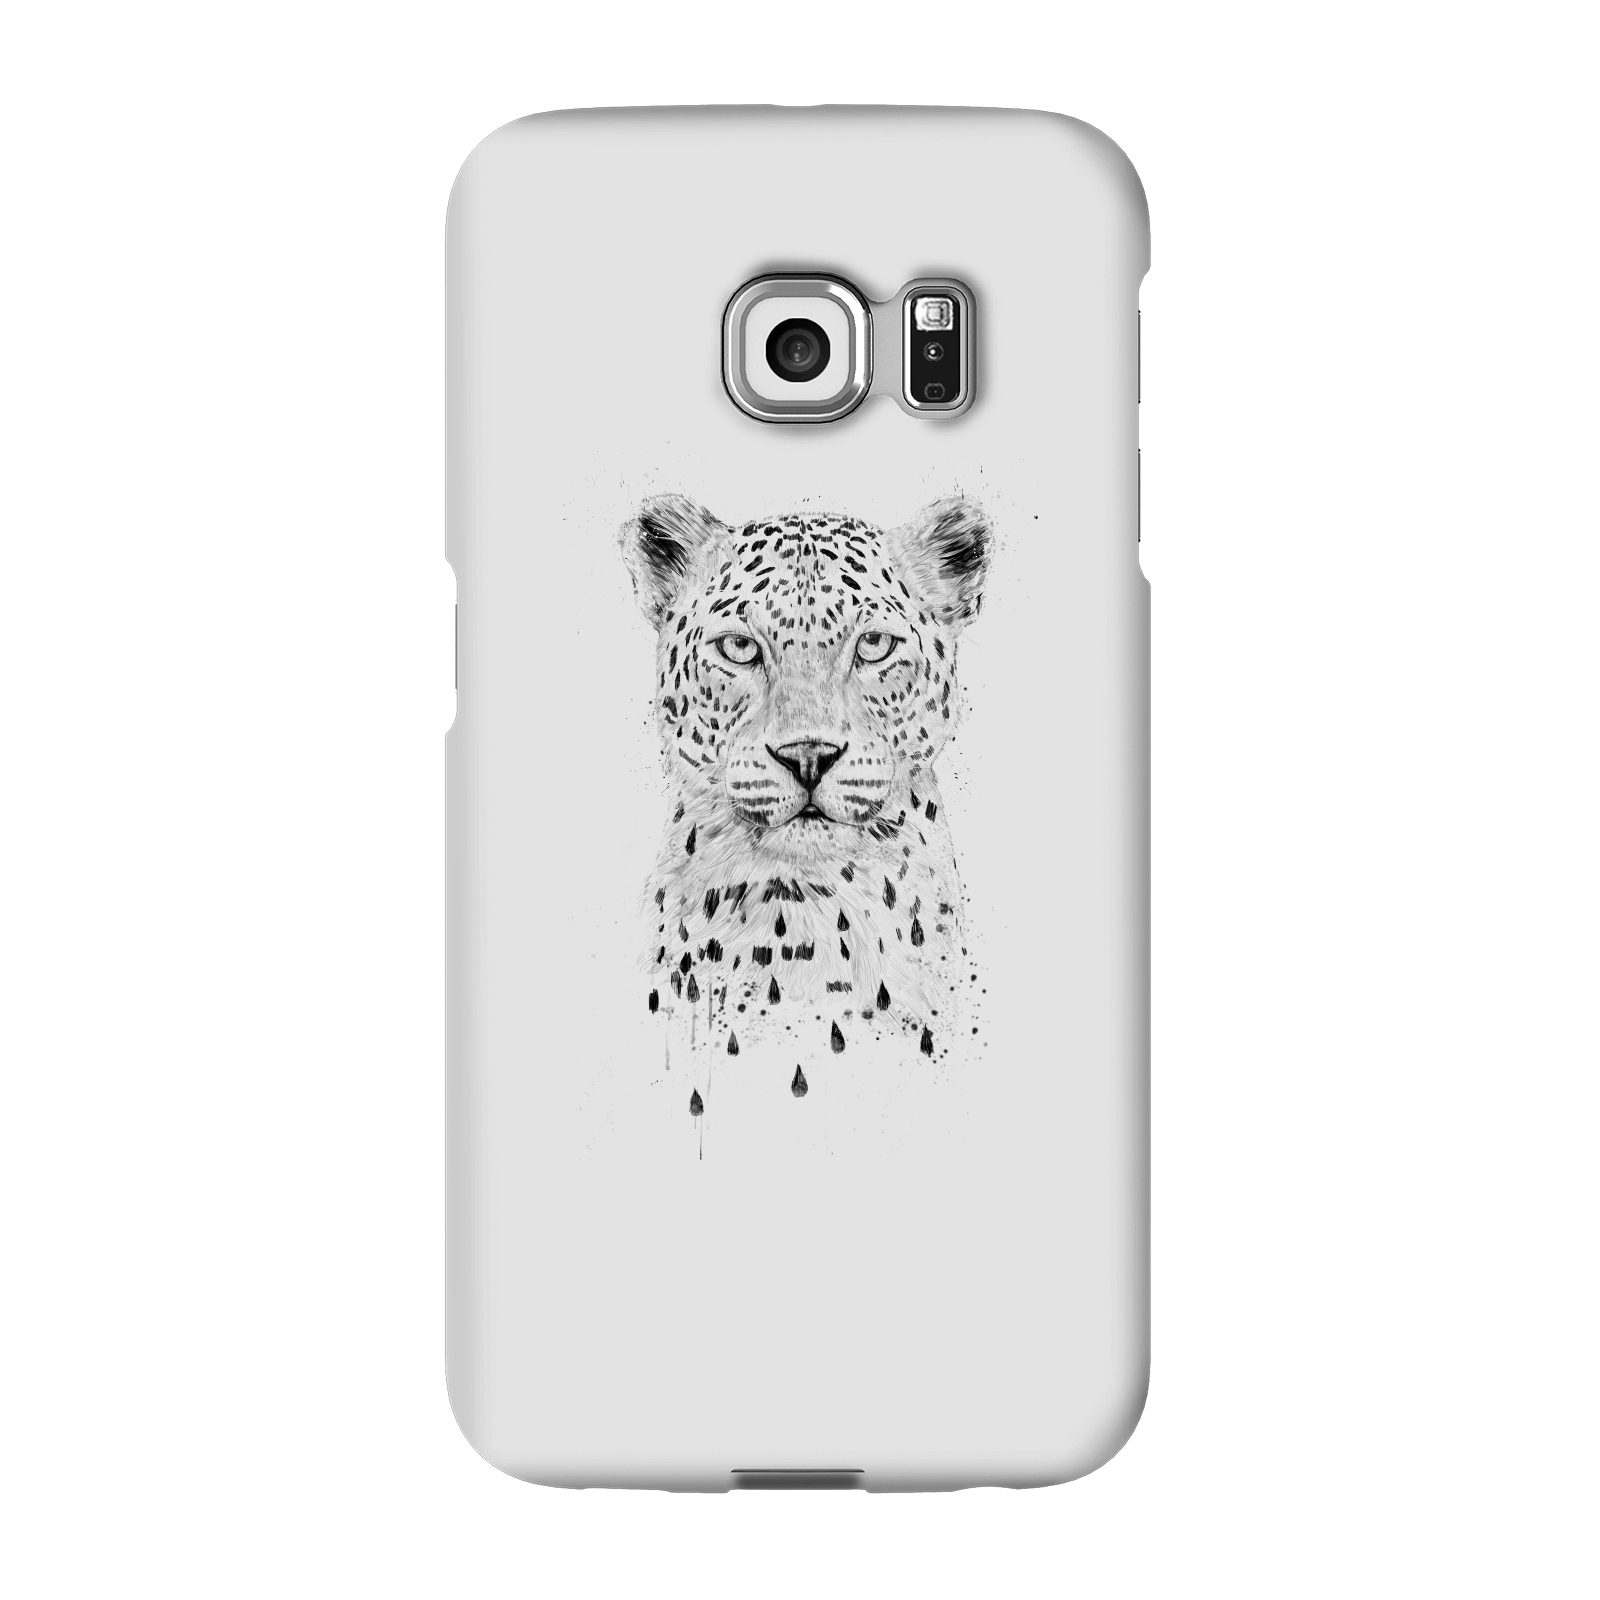 balazs solti leopard phone case for iphone and android - samsung s6 edge plus - snap case - gloss